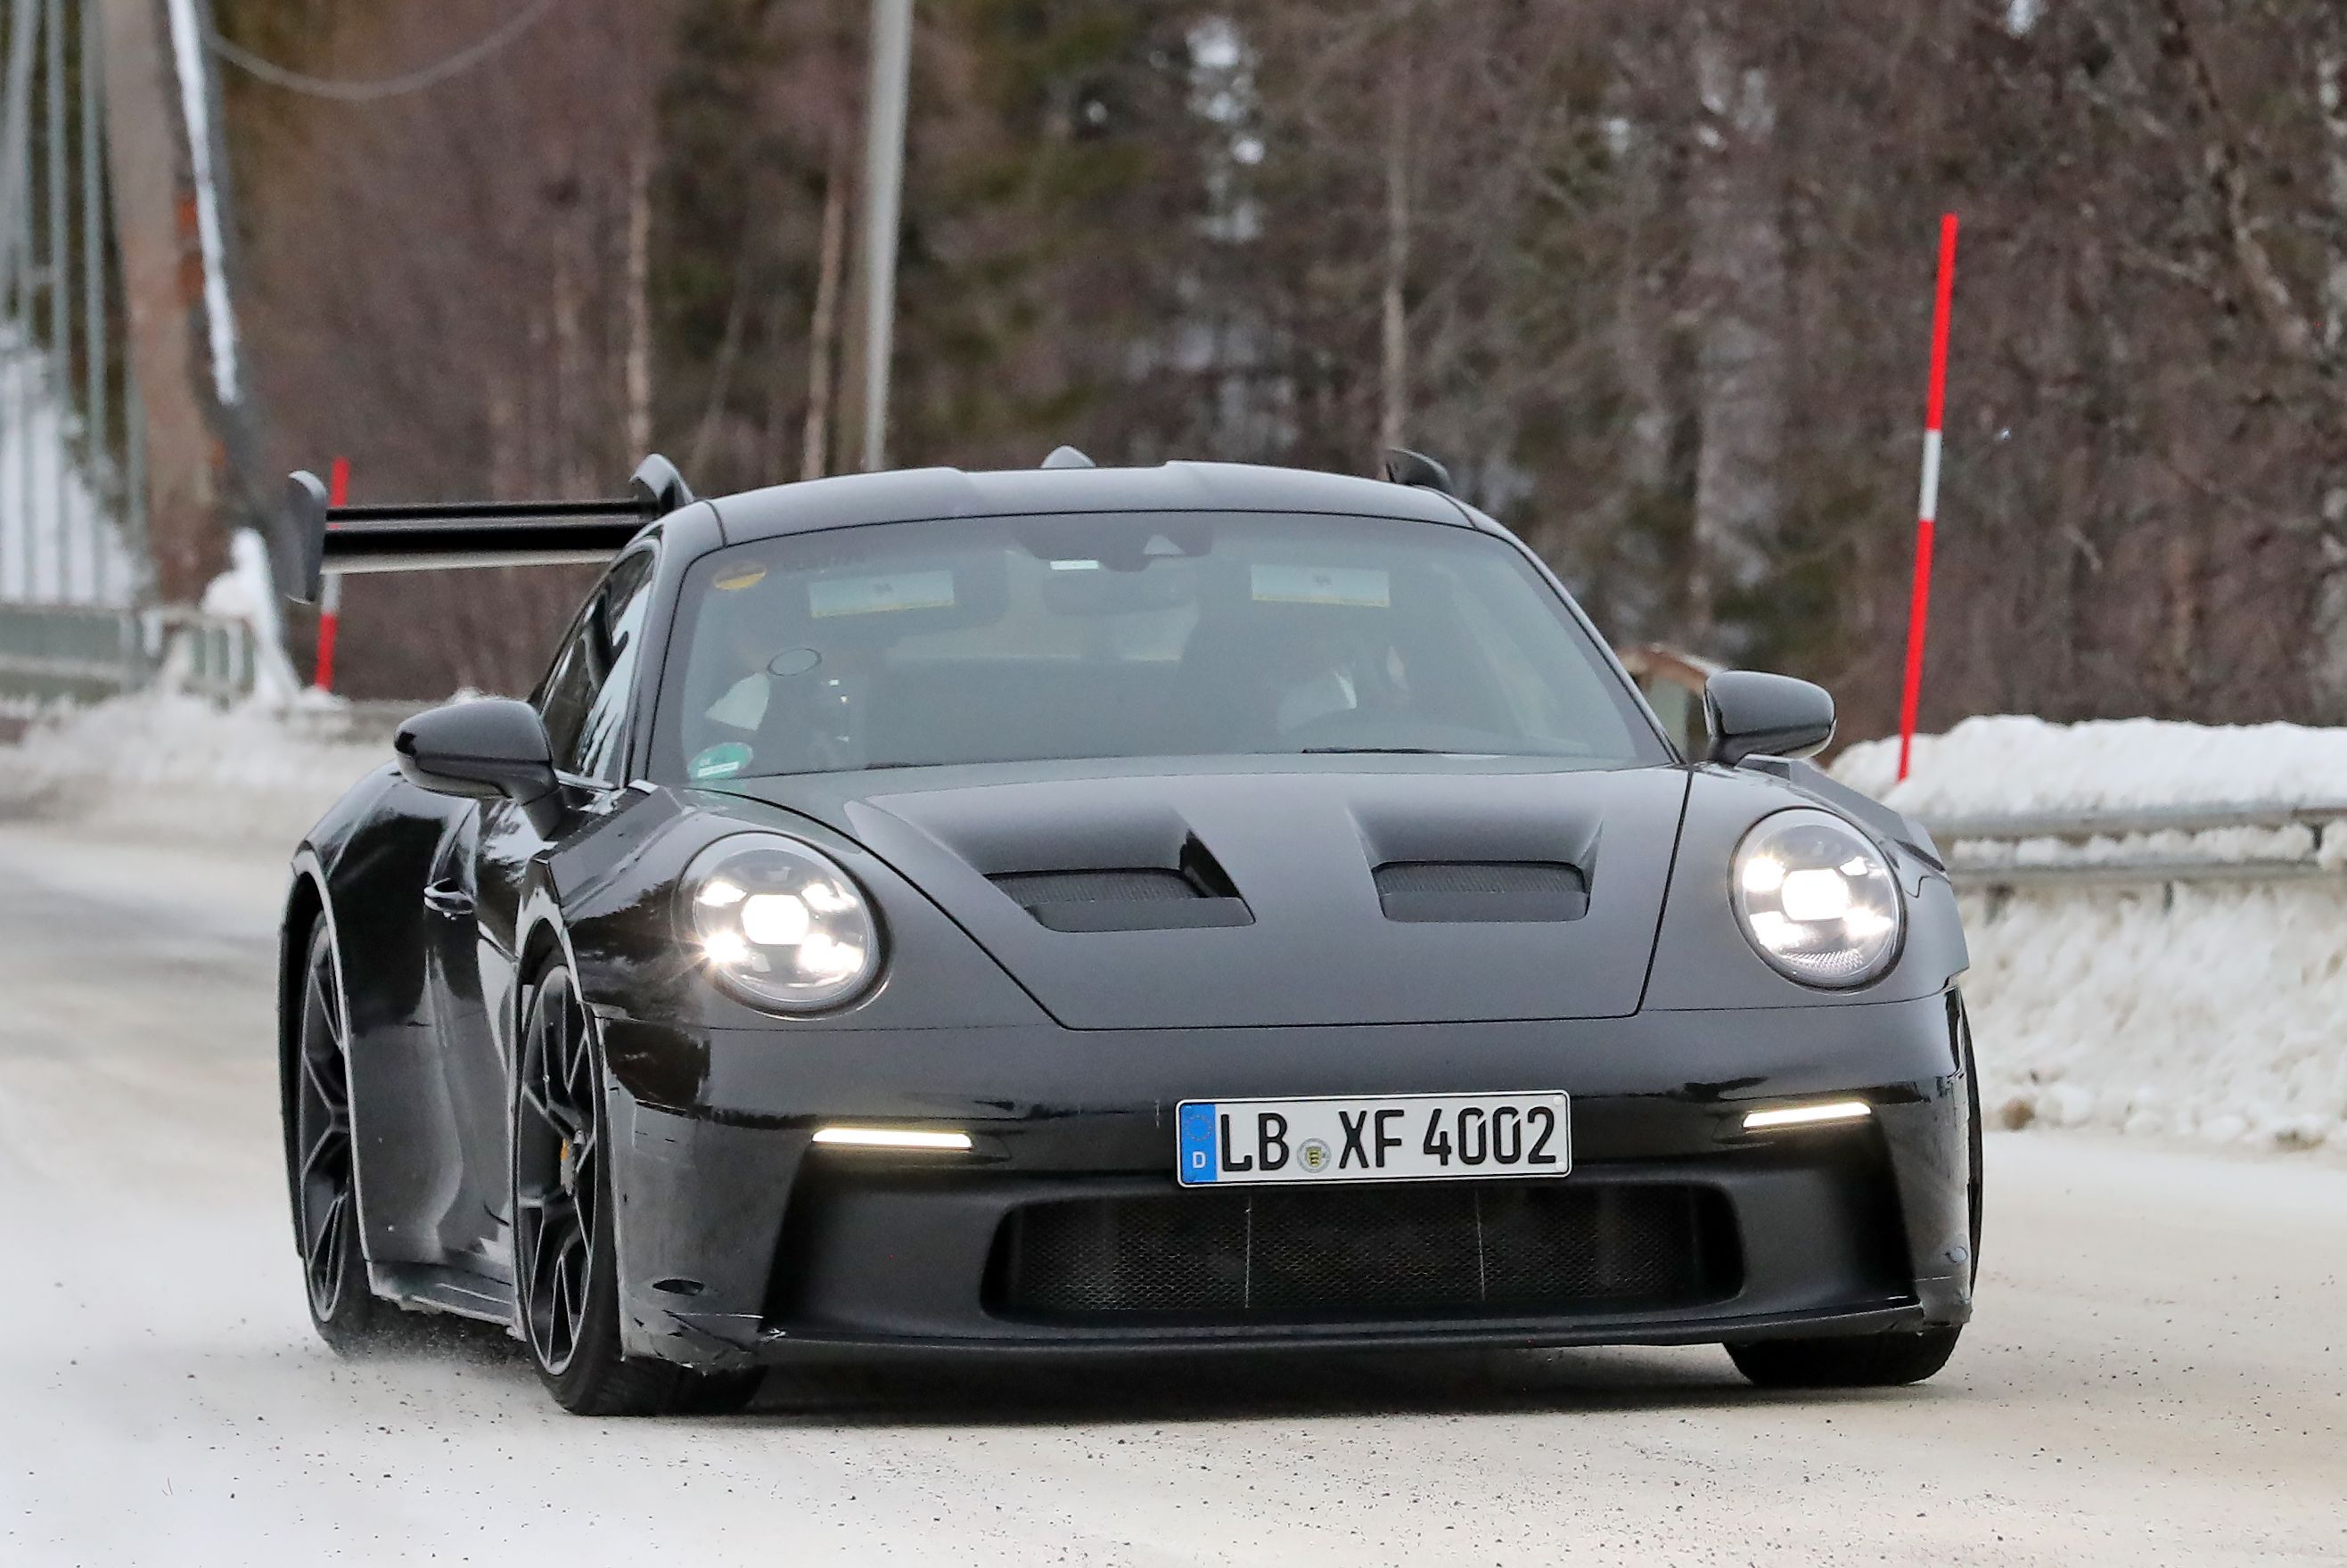 2023 Porsche 911 GT3 RS spy shots and video: New track star coming Aug. 17